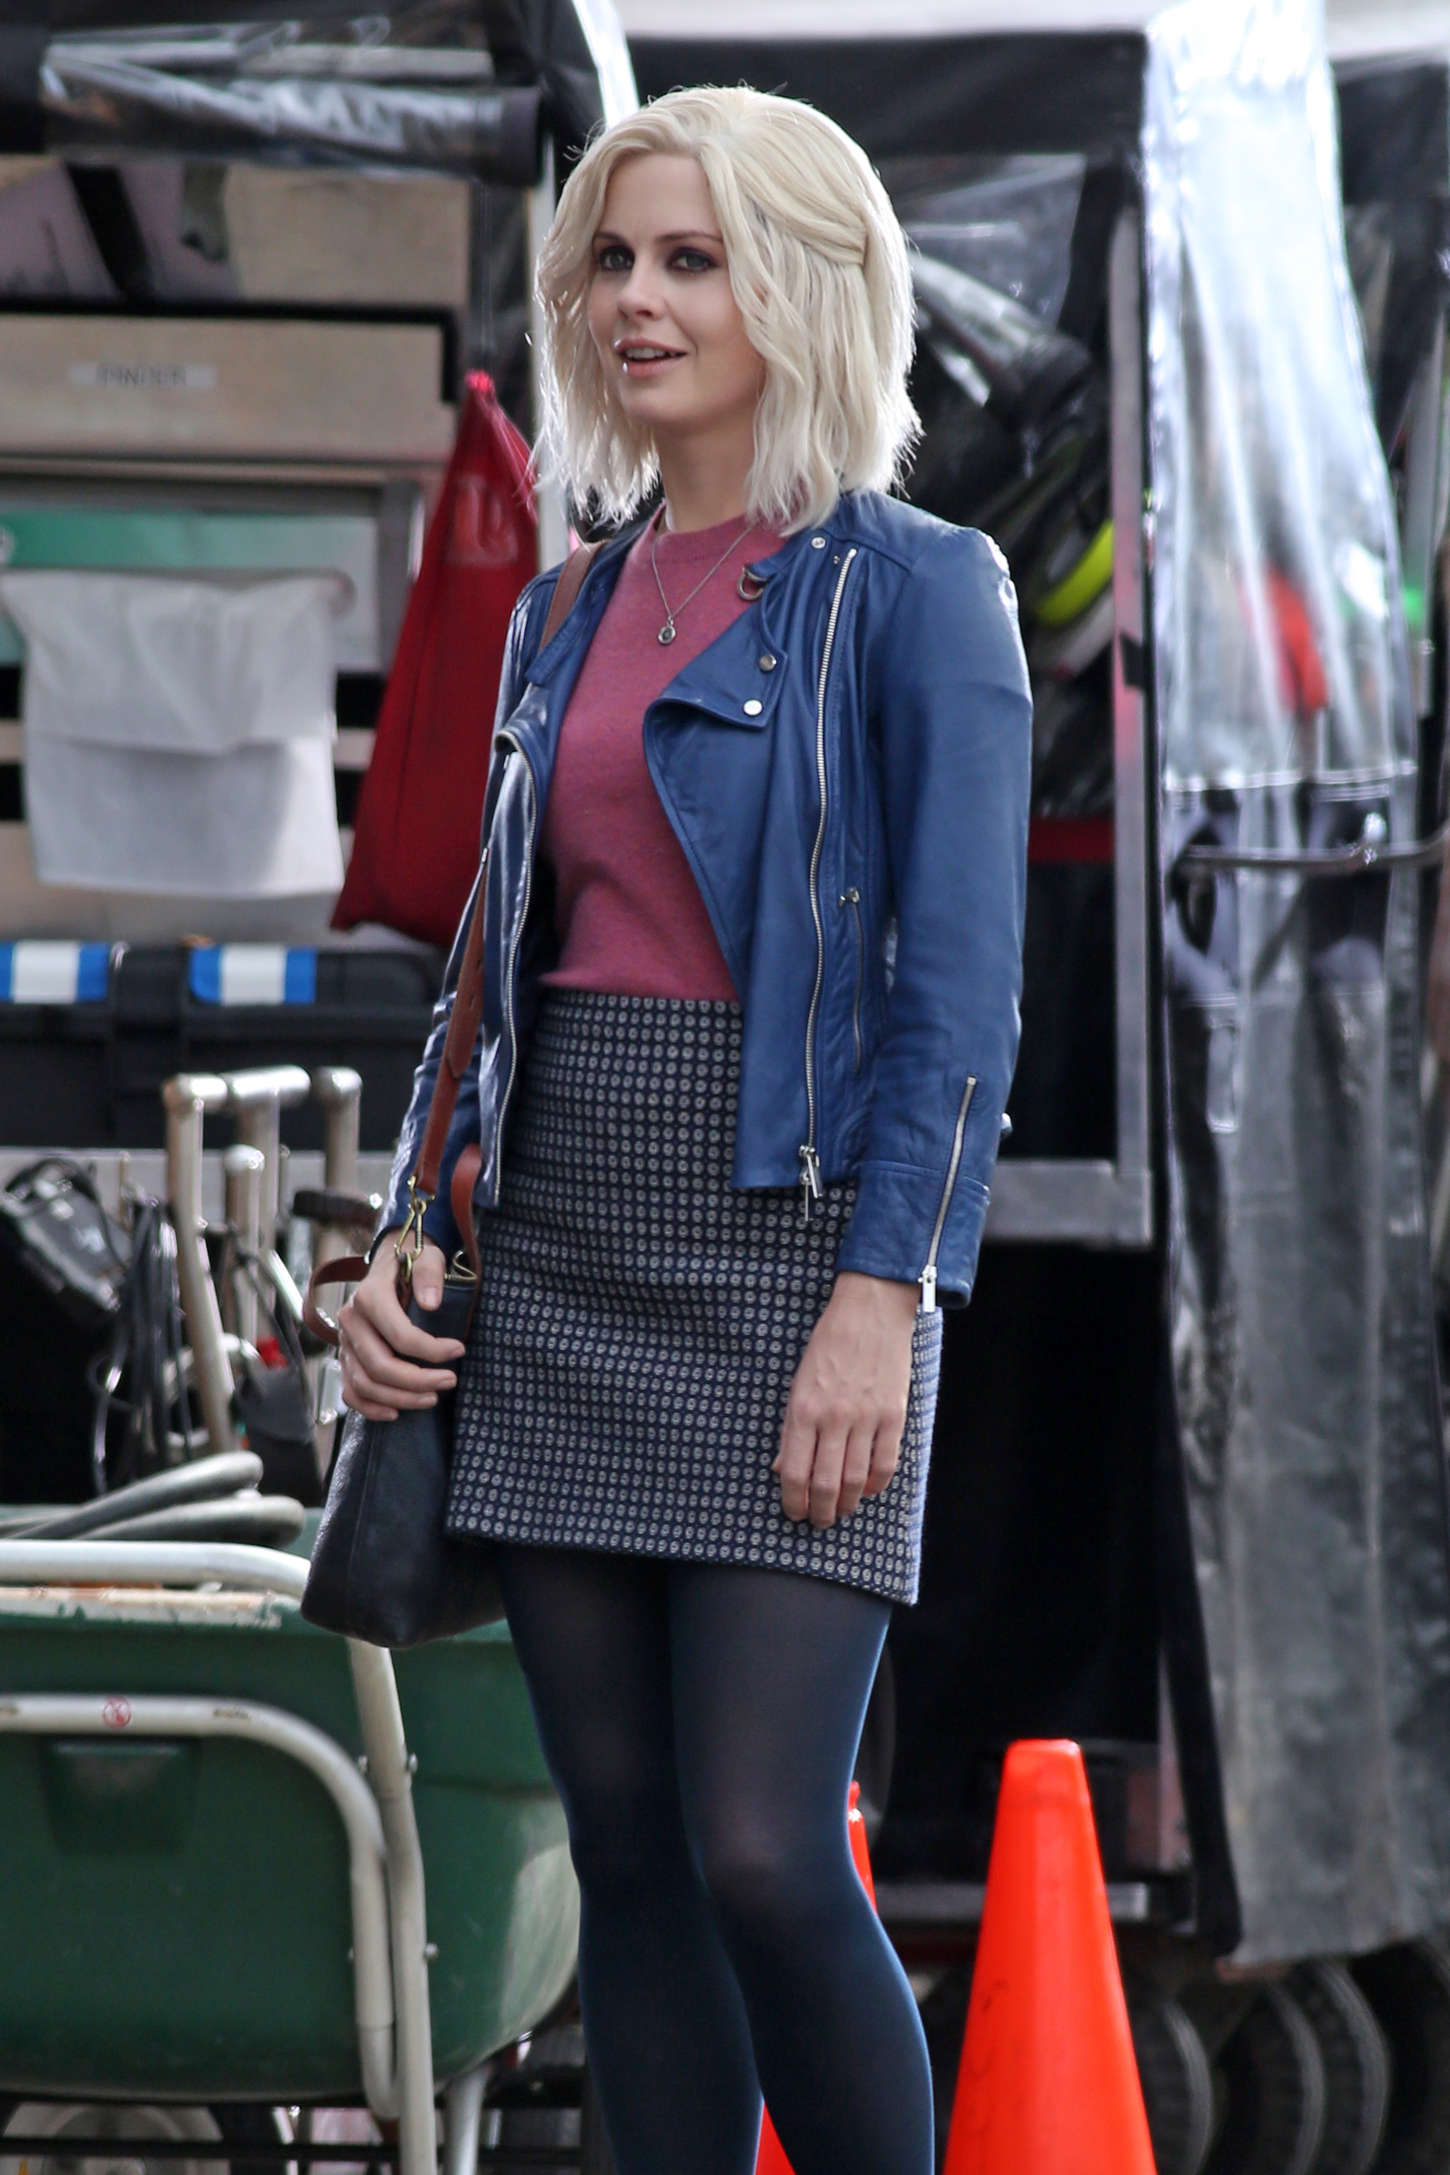 Rose McIver on the set of iZombie in Vancouver